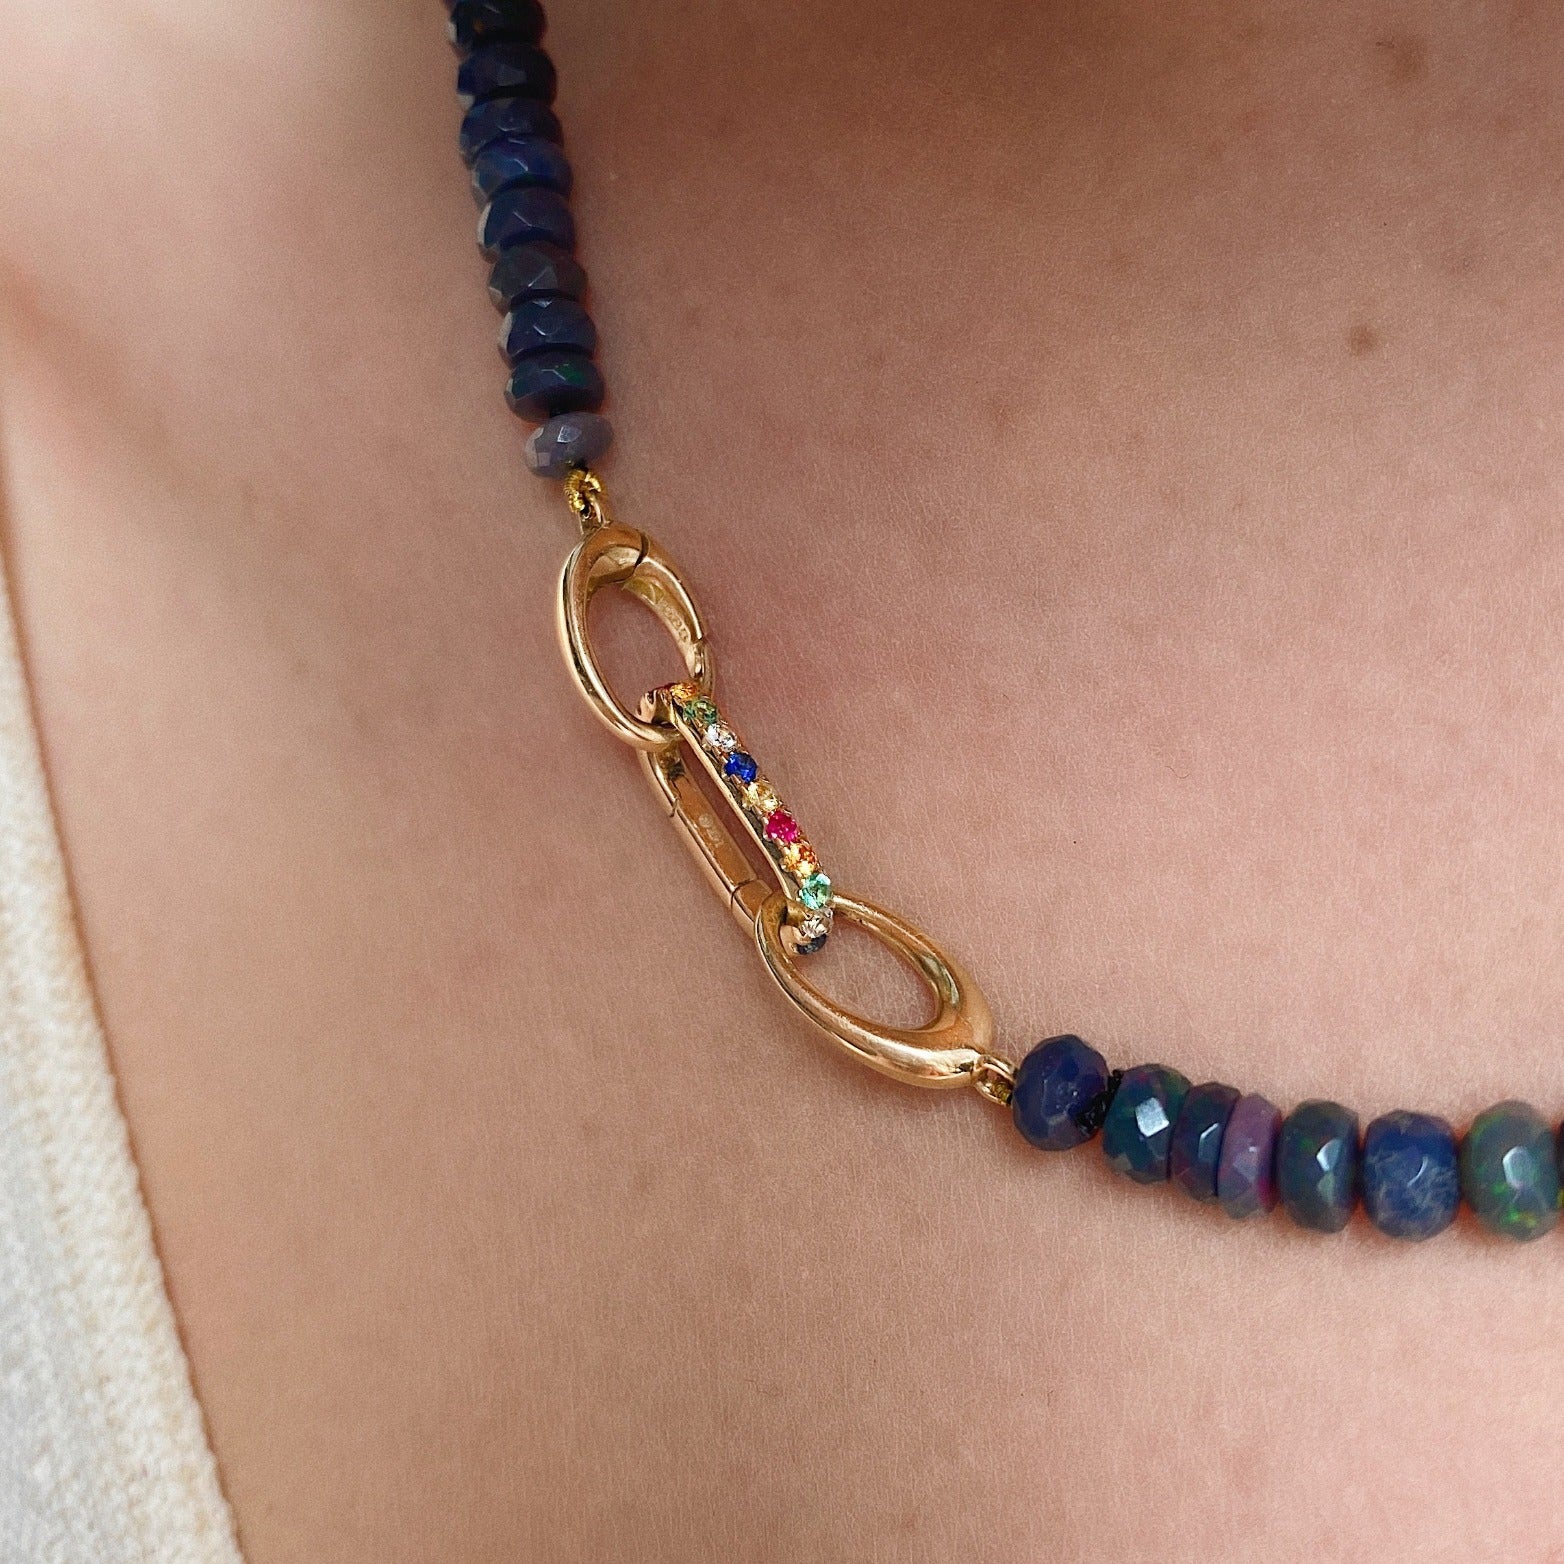 14k yellow gold small oval locking charm with rainbow colored stones. Styled on a neck locked into oval clasps of a beaded necklace.